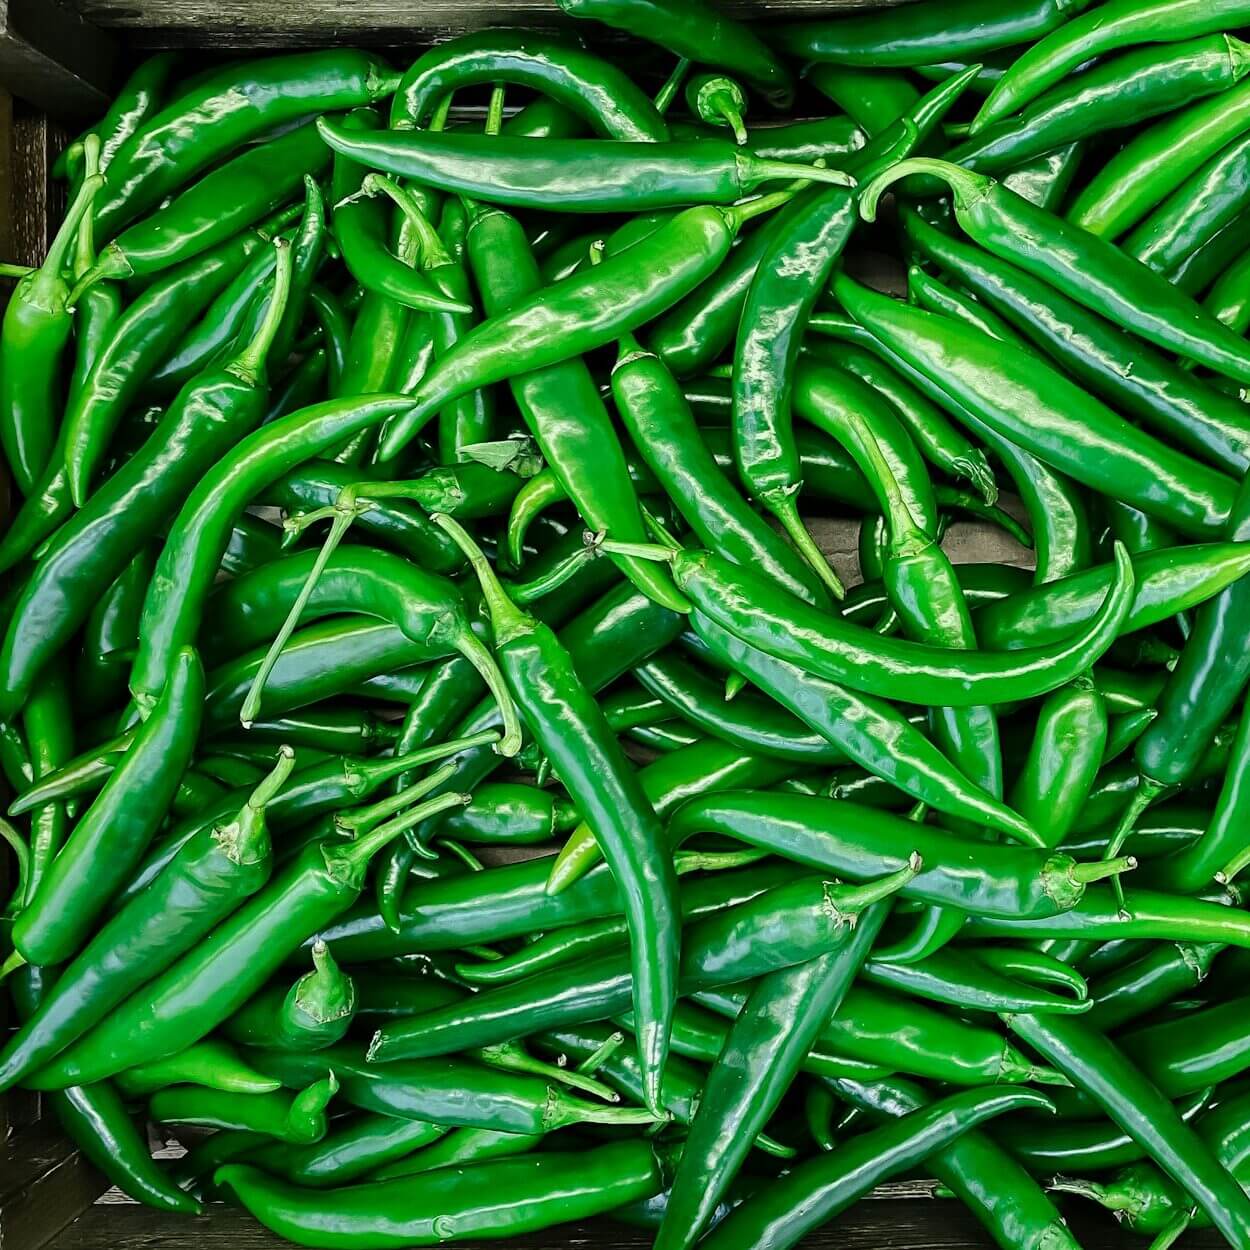 Green chili peppers in box